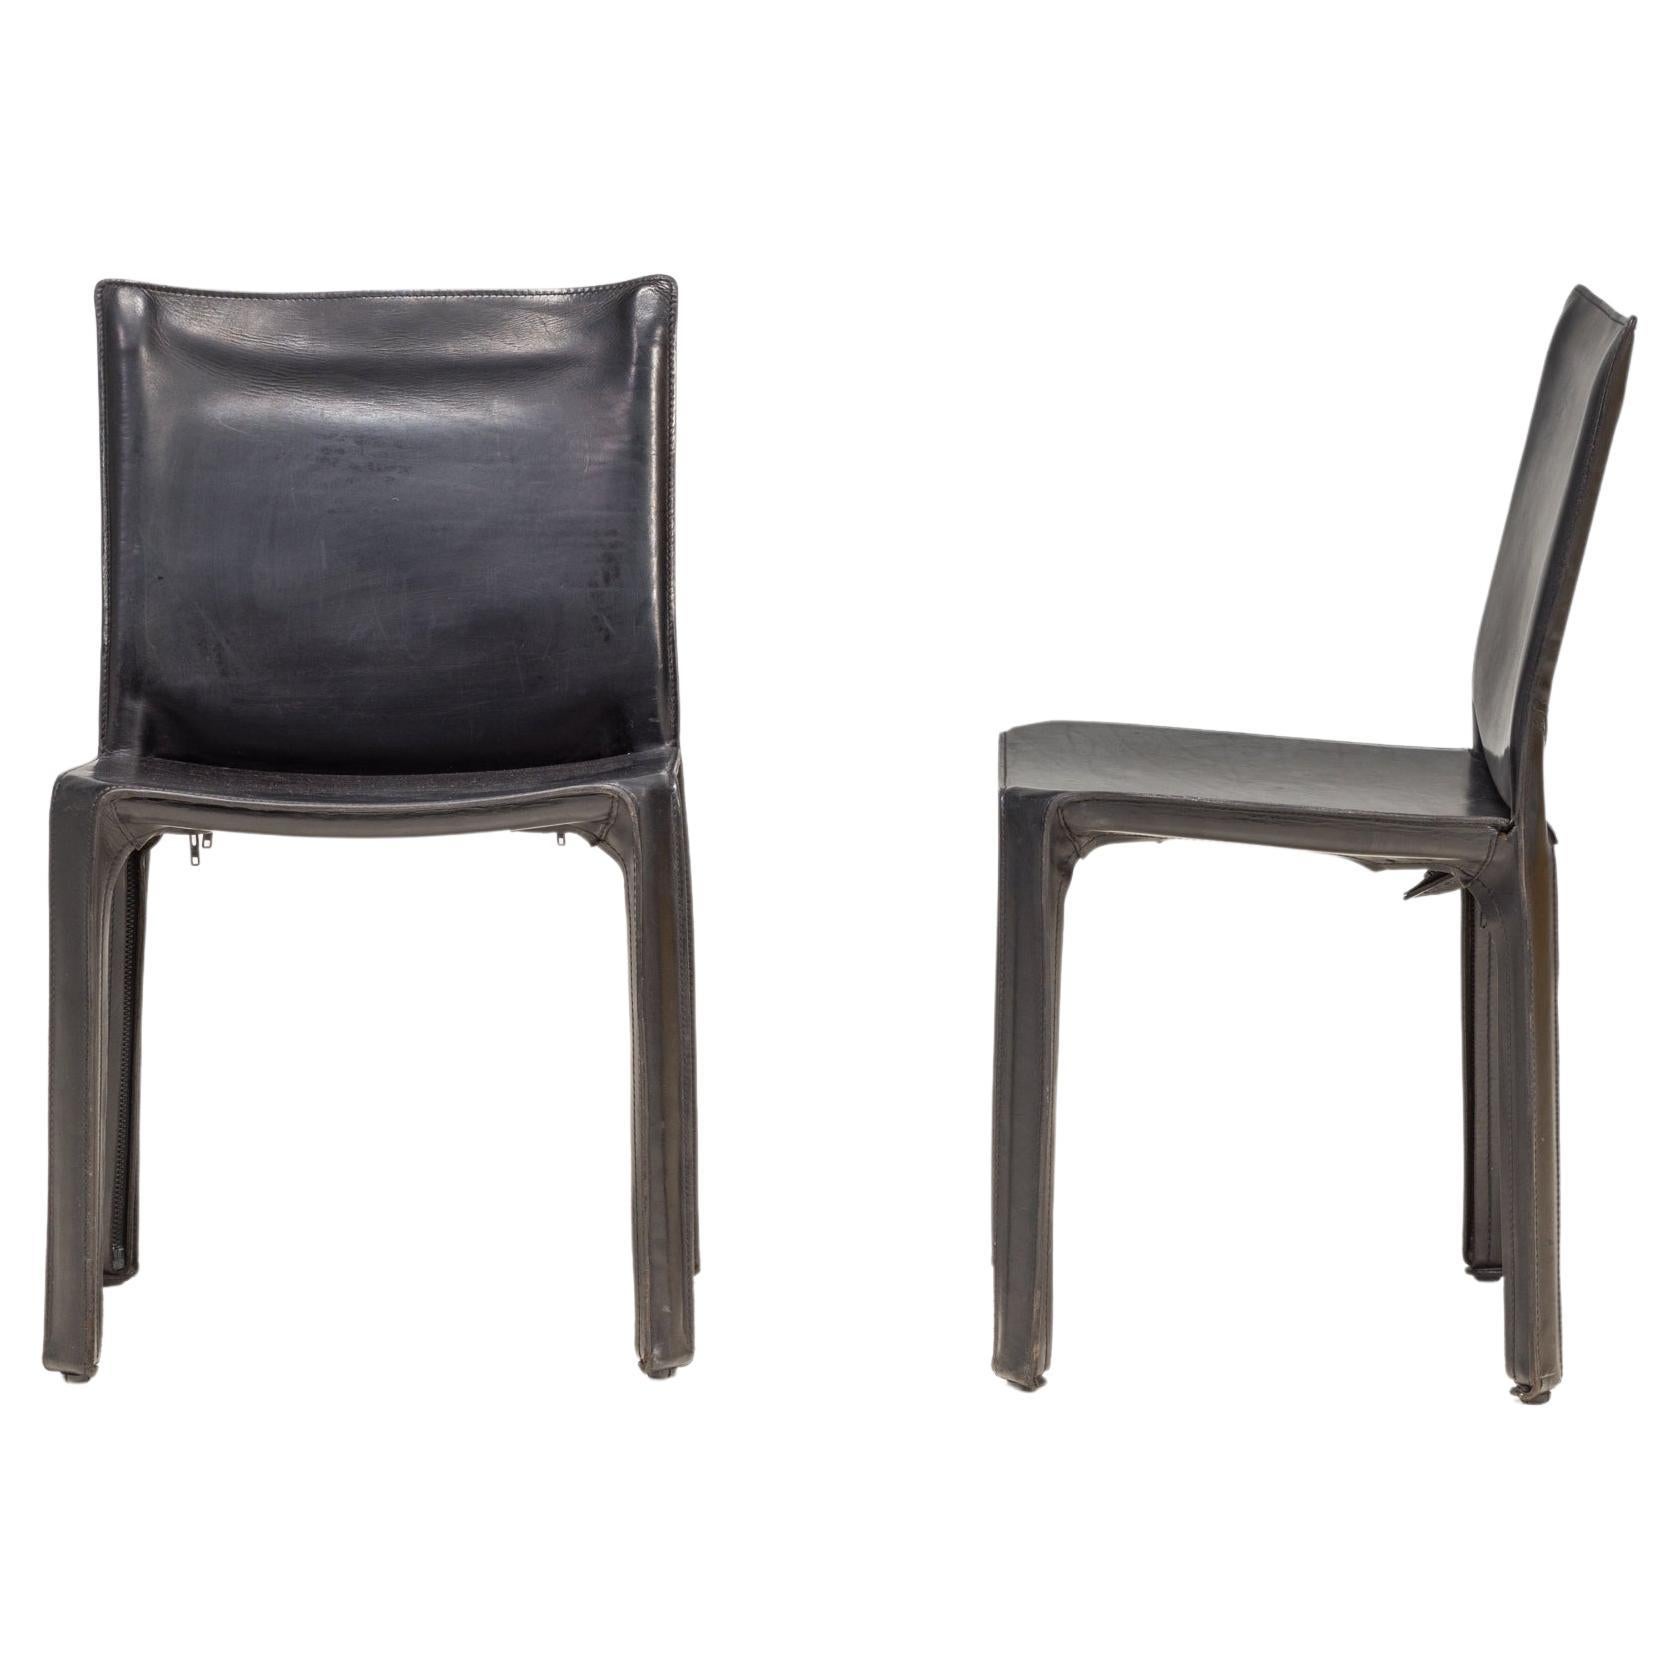 Cassina by Mario Bellini Cab 412 Black Leather Dining Chairs, Set of Two